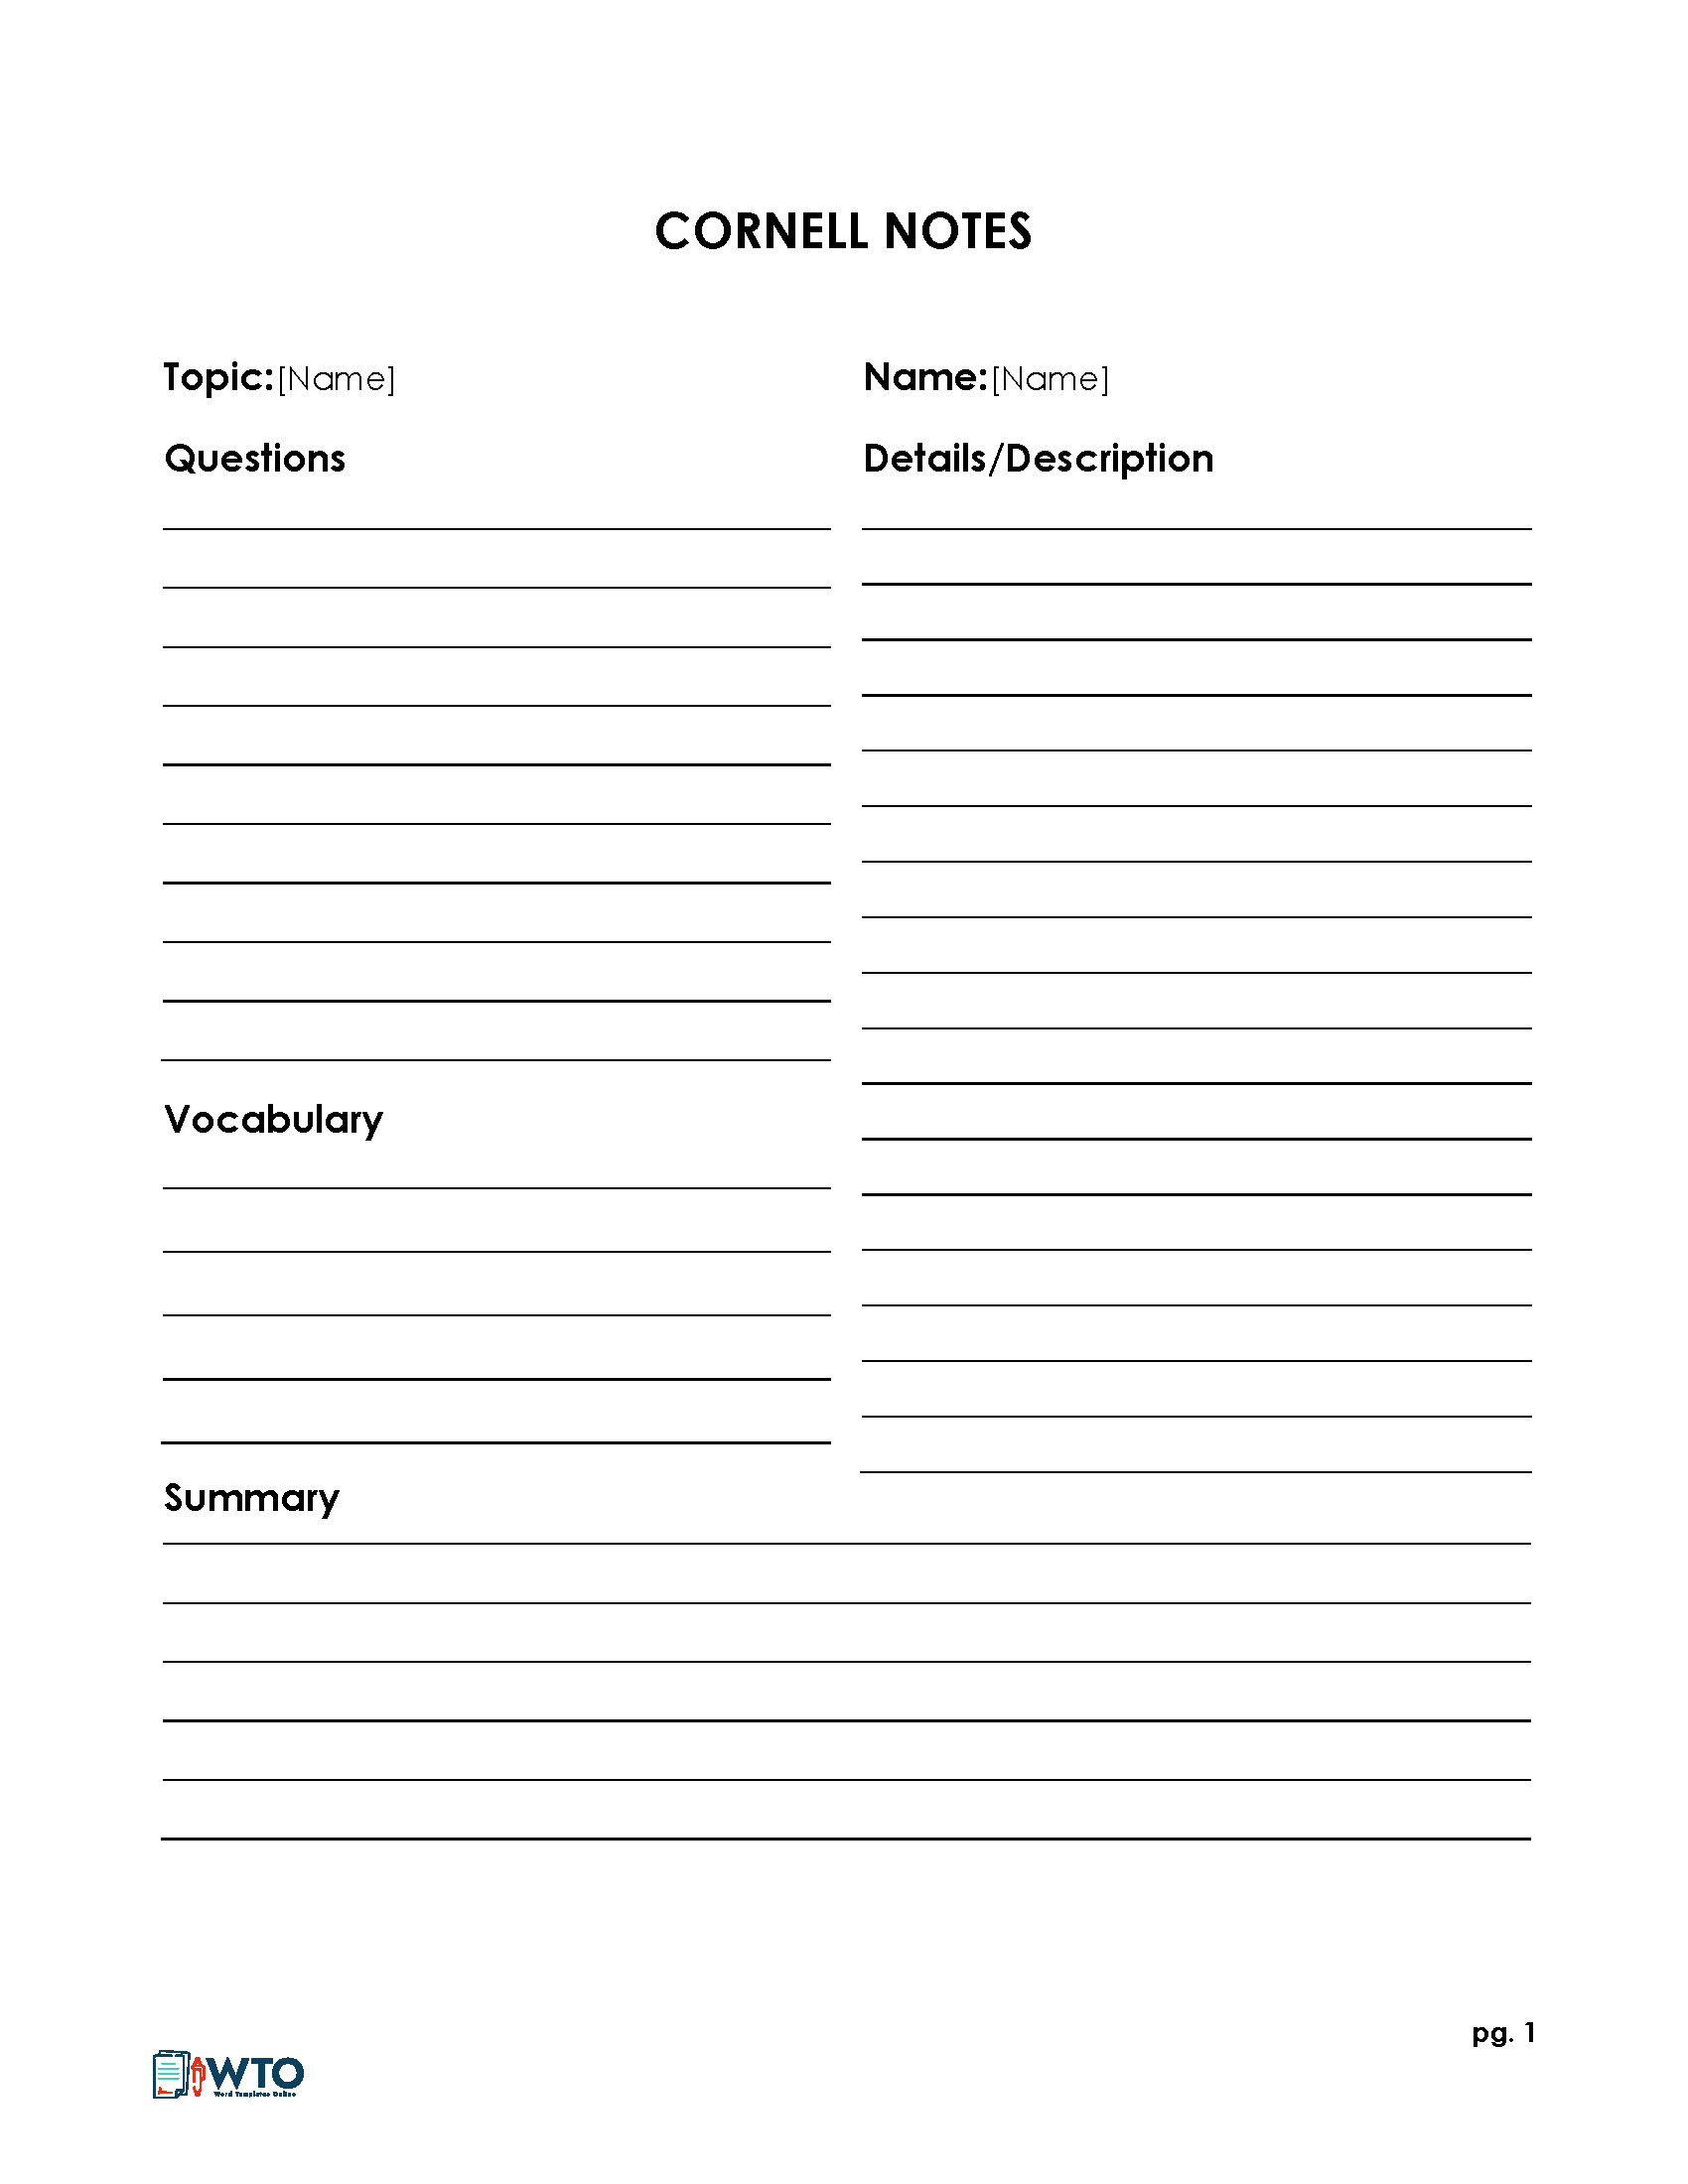 Professional Cornell Note Template Excel